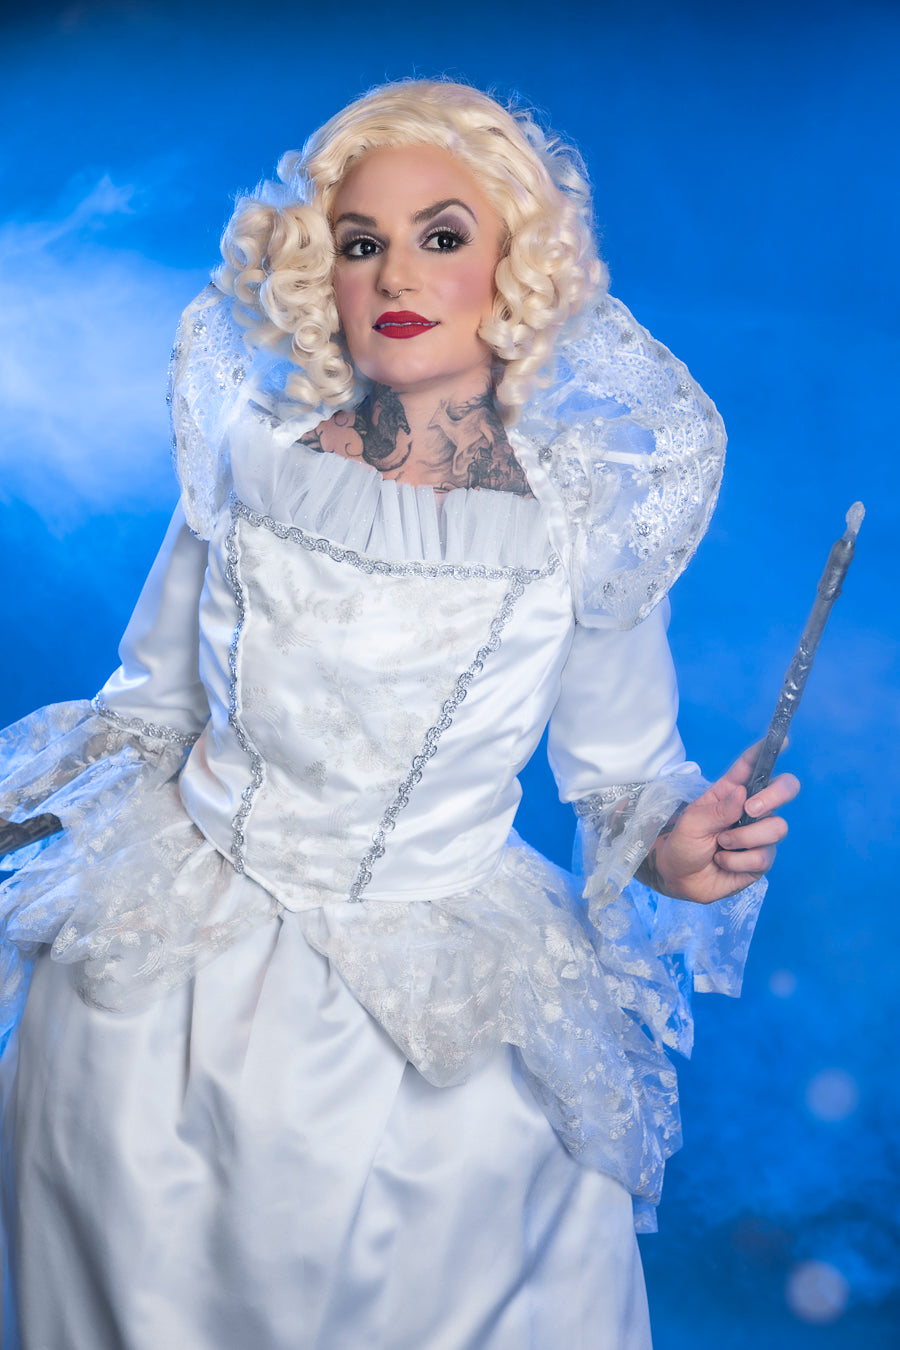 Cinderella Live Action Fairy Godmother Costume Hire or Cosplay, plus Makeup and Photography. Proudly by and available at, Little Shop of Horrors Costumery 6/1 Watt Rd Mornington & Melbourne